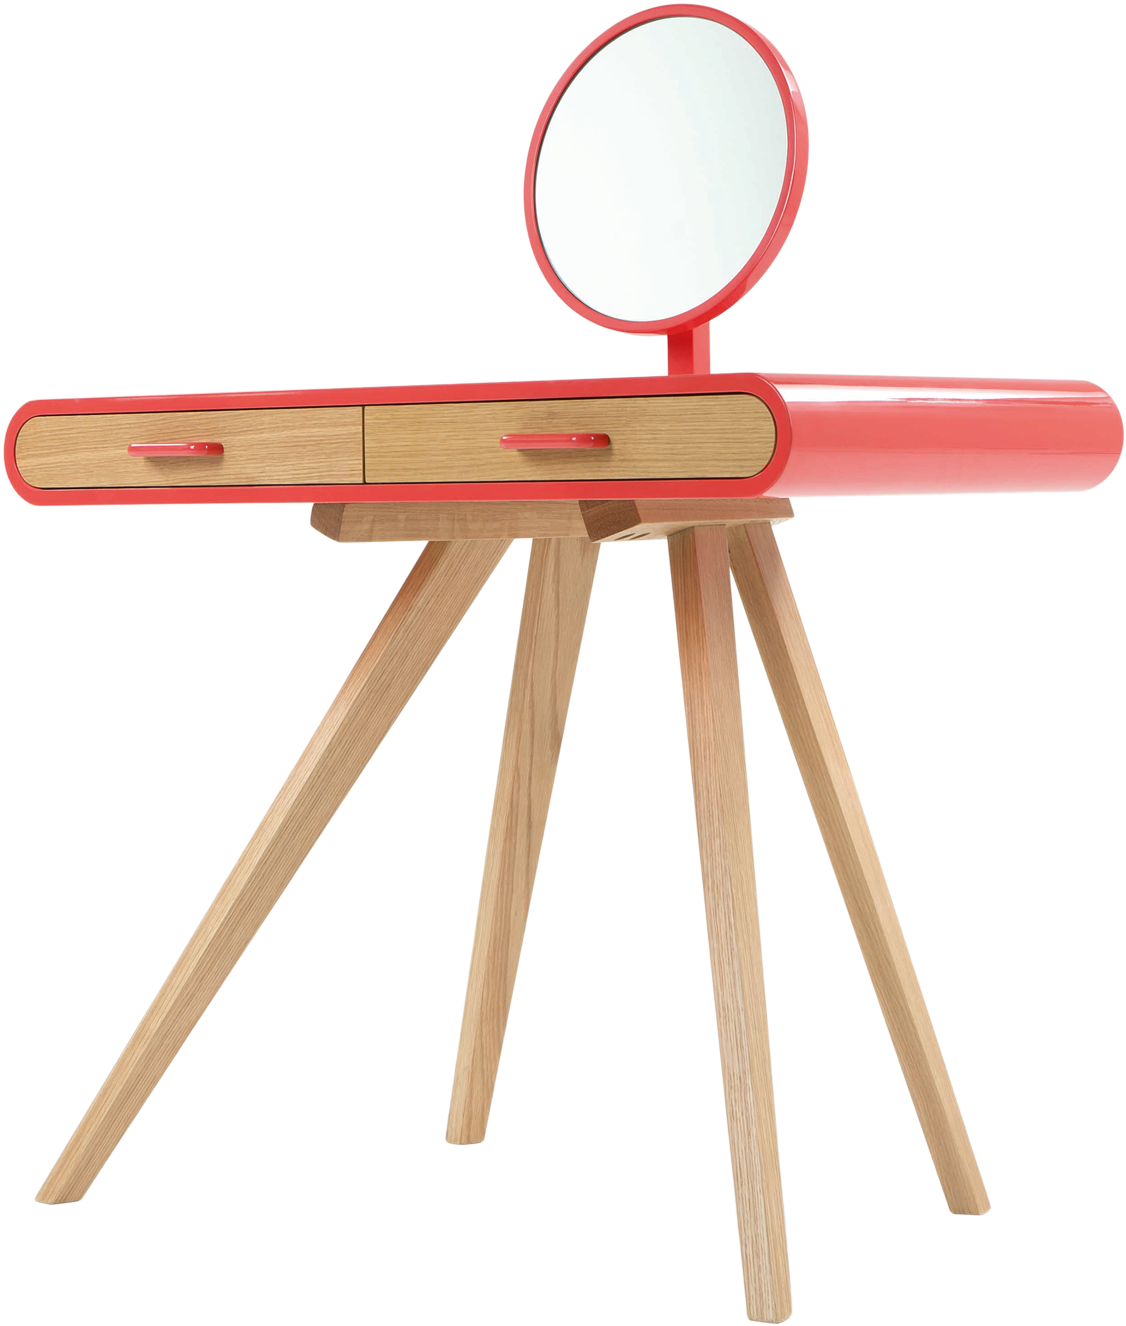 A Red And Wooden Table With A Mirror